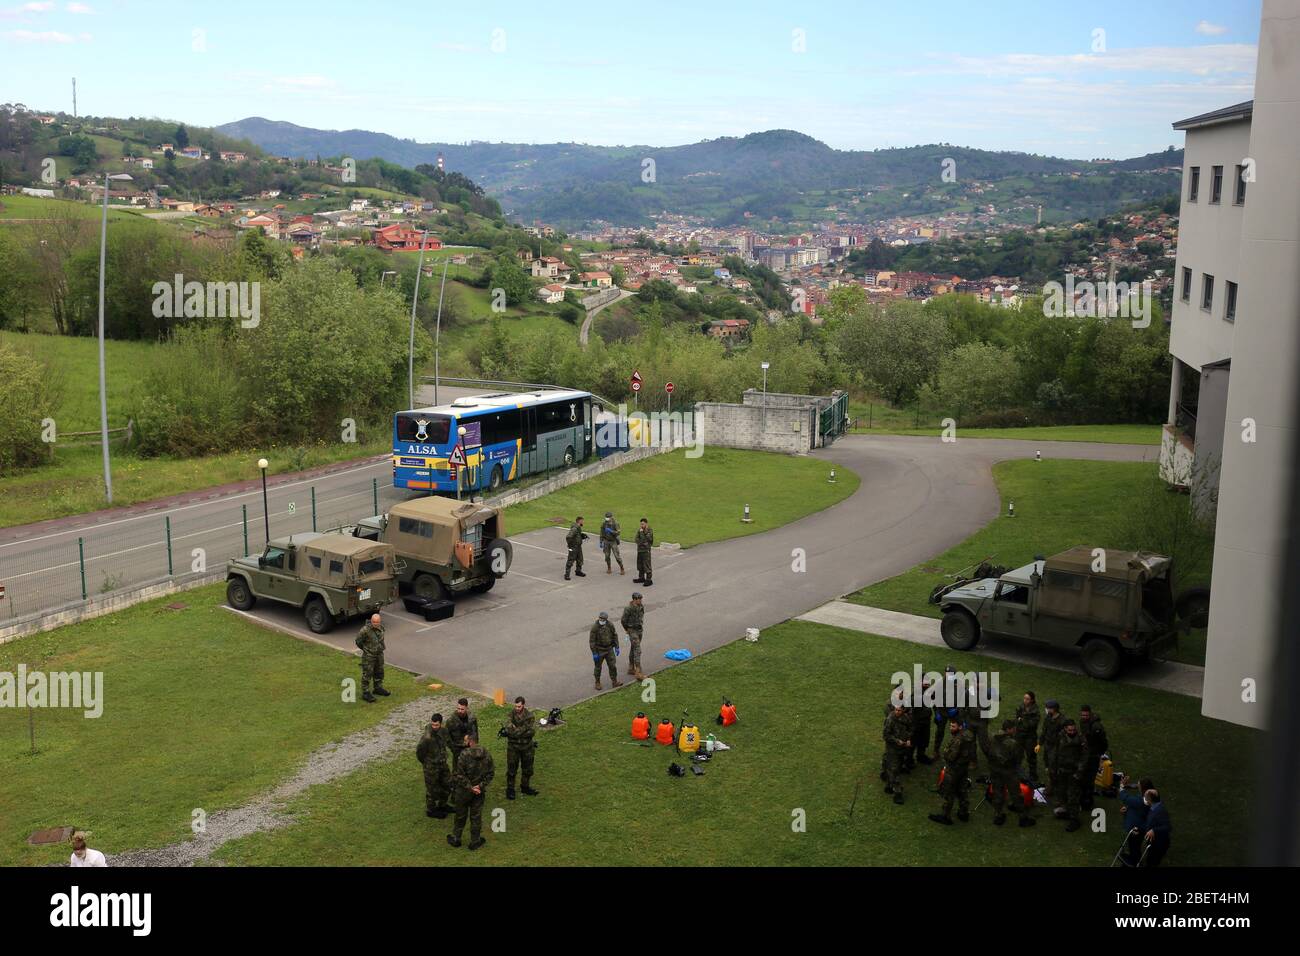 Langreo, Spain. 15th Apr, 2020. Langreo, SPAIN: The facilities have good views of all Langreo during the 33rd day of the Spanish Alert State in Mentalia Langreo in Langreo, Spain on April 15, 2020. (Photo by Alberto Brevers/Pacific Press) Credit: Pacific Press Agency/Alamy Live News Stock Photo